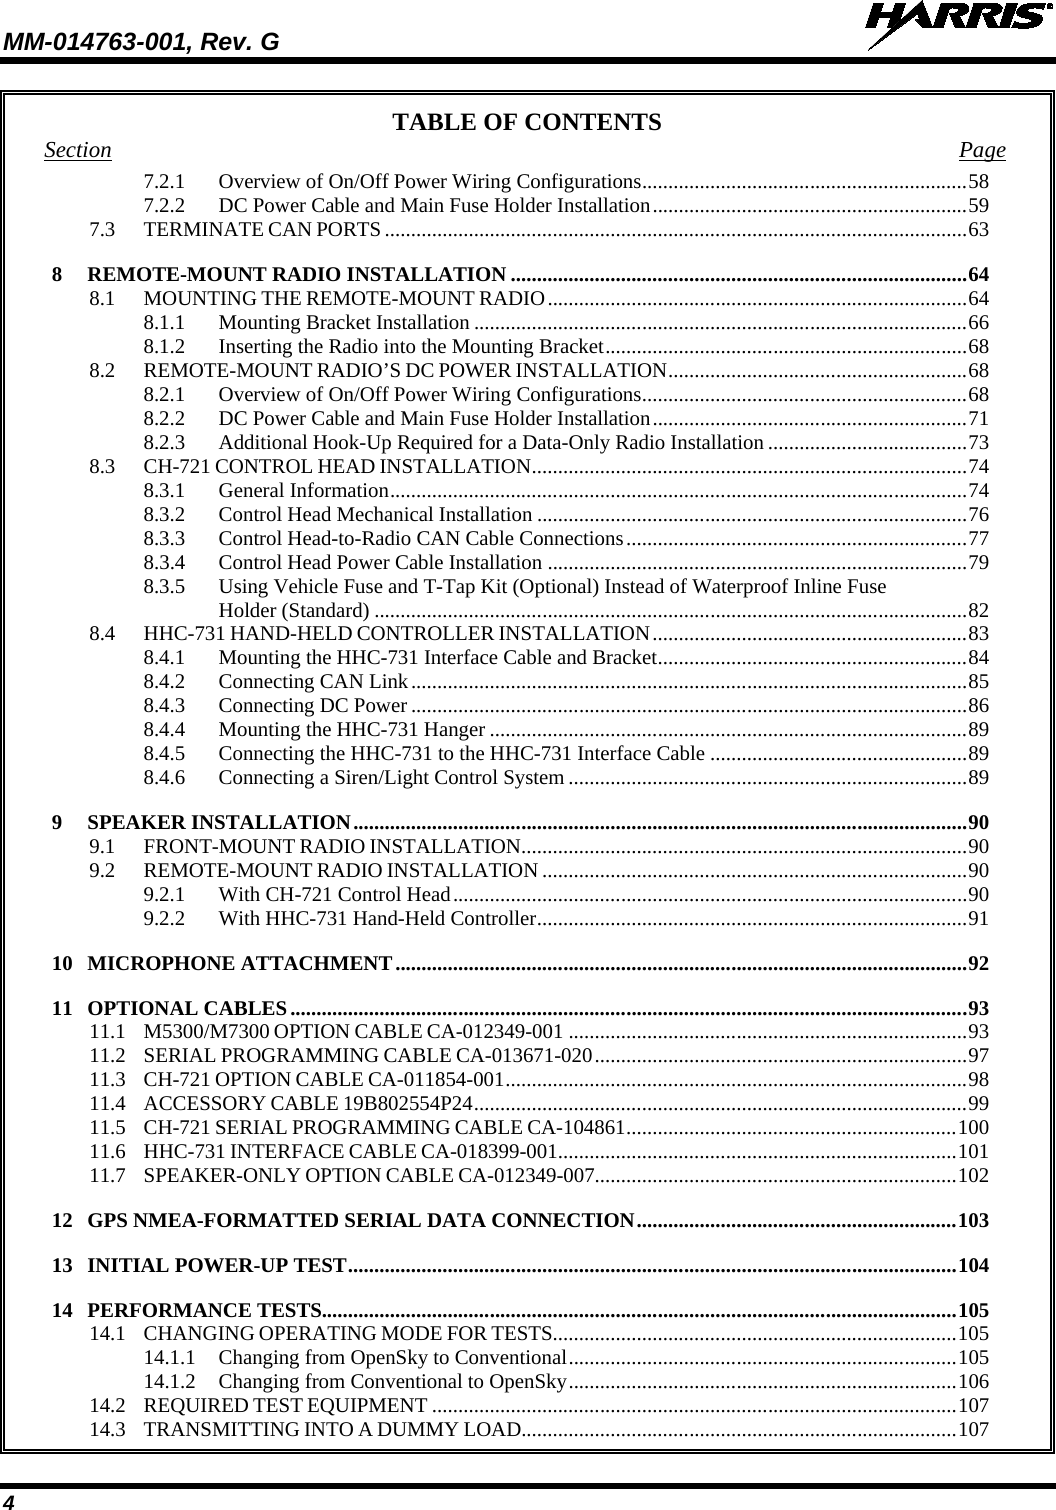 MM-014763-001, Rev. G   4 TABLE OF CONTENTS Section Page 7.2.1 Overview of On/Off Power Wiring Configurations .............................................................. 58 7.2.2 DC Power Cable and Main Fuse Holder Installation ............................................................ 59 7.3 TERMINATE CAN PORTS ............................................................................................................... 63 8 REMOTE-MOUNT RADIO INSTALLATION ....................................................................................... 64 8.1 MOUNTING THE REMOTE-MOUNT RADIO ................................................................................ 64 8.1.1 Mounting Bracket Installation .............................................................................................. 66 8.1.2 Inserting the Radio into the Mounting Bracket ..................................................................... 68 8.2 REMOTE-MOUNT RADIO’S DC POWER INSTALLATION ......................................................... 68 8.2.1 Overview of On/Off Power Wiring Configurations .............................................................. 68 8.2.2 DC Power Cable and Main Fuse Holder Installation ............................................................ 71 8.2.3 Additional Hook-Up Required for a Data-Only Radio Installation ...................................... 73 8.3 CH-721 CONTROL HEAD INSTALLATION ................................................................................... 74 8.3.1 General Information .............................................................................................................. 74 8.3.2 Control Head Mechanical Installation .................................................................................. 76 8.3.3 Control Head-to-Radio CAN Cable Connections ................................................................. 77 8.3.4 Control Head Power Cable Installation ................................................................................ 79 8.3.5 Using Vehicle Fuse and T-Tap Kit (Optional) Instead of Waterproof Inline Fuse Holder (Standard) ................................................................................................................. 82 8.4 HHC-731 HAND-HELD CONTROLLER INSTALLATION ............................................................ 83 8.4.1 Mounting the HHC-731 Interface Cable and Bracket ........................................................... 84 8.4.2 Connecting CAN Link .......................................................................................................... 85 8.4.3 Connecting DC Power .......................................................................................................... 86 8.4.4 Mounting the HHC-731 Hanger ........................................................................................... 89 8.4.5 Connecting the HHC-731 to the HHC-731 Interface Cable ................................................. 89 8.4.6 Connecting a Siren/Light Control System ............................................................................ 89 9 SPEAKER INSTALLATION ..................................................................................................................... 90 9.1 FRONT-MOUNT RADIO INSTALLATION ..................................................................................... 90 9.2 REMOTE-MOUNT RADIO INSTALLATION ................................................................................. 90 9.2.1 With CH-721 Control Head .................................................................................................. 90 9.2.2 With HHC-731 Hand-Held Controller .................................................................................. 91 10 MICROPHONE ATTACHMENT ............................................................................................................. 92 11 OPTIONAL CABLES ................................................................................................................................. 93 11.1 M5300/M7300 OPTION CABLE CA-012349-001 ............................................................................ 93 11.2 SERIAL PROGRAMMING CABLE CA-013671-020 ....................................................................... 97 11.3 CH-721 OPTION CABLE CA-011854-001 ........................................................................................ 98 11.4 ACCESSORY CABLE 19B802554P24 .............................................................................................. 99 11.5 CH-721 SERIAL PROGRAMMING CABLE CA-104861 ............................................................... 100 11.6 HHC-731 INTERFACE CABLE CA-018399-001 ............................................................................ 101 11.7 SPEAKER-ONLY OPTION CABLE CA-012349-007..................................................................... 102 12 GPS NMEA-FORMATTED SERIAL DATA CONNECTION ............................................................. 103 13 INITIAL POWER-UP TEST .................................................................................................................... 104 14 PERFORMANCE TESTS......................................................................................................................... 105 14.1 CHANGING OPERATING MODE FOR TESTS ............................................................................. 105 14.1.1 Changing from OpenSky to Conventional .......................................................................... 105 14.1.2 Changing from Conventional to OpenSky .......................................................................... 106 14.2 REQUIRED TEST EQUIPMENT .................................................................................................... 107 14.3 TRANSMITTING INTO A DUMMY LOAD................................................................................... 107 